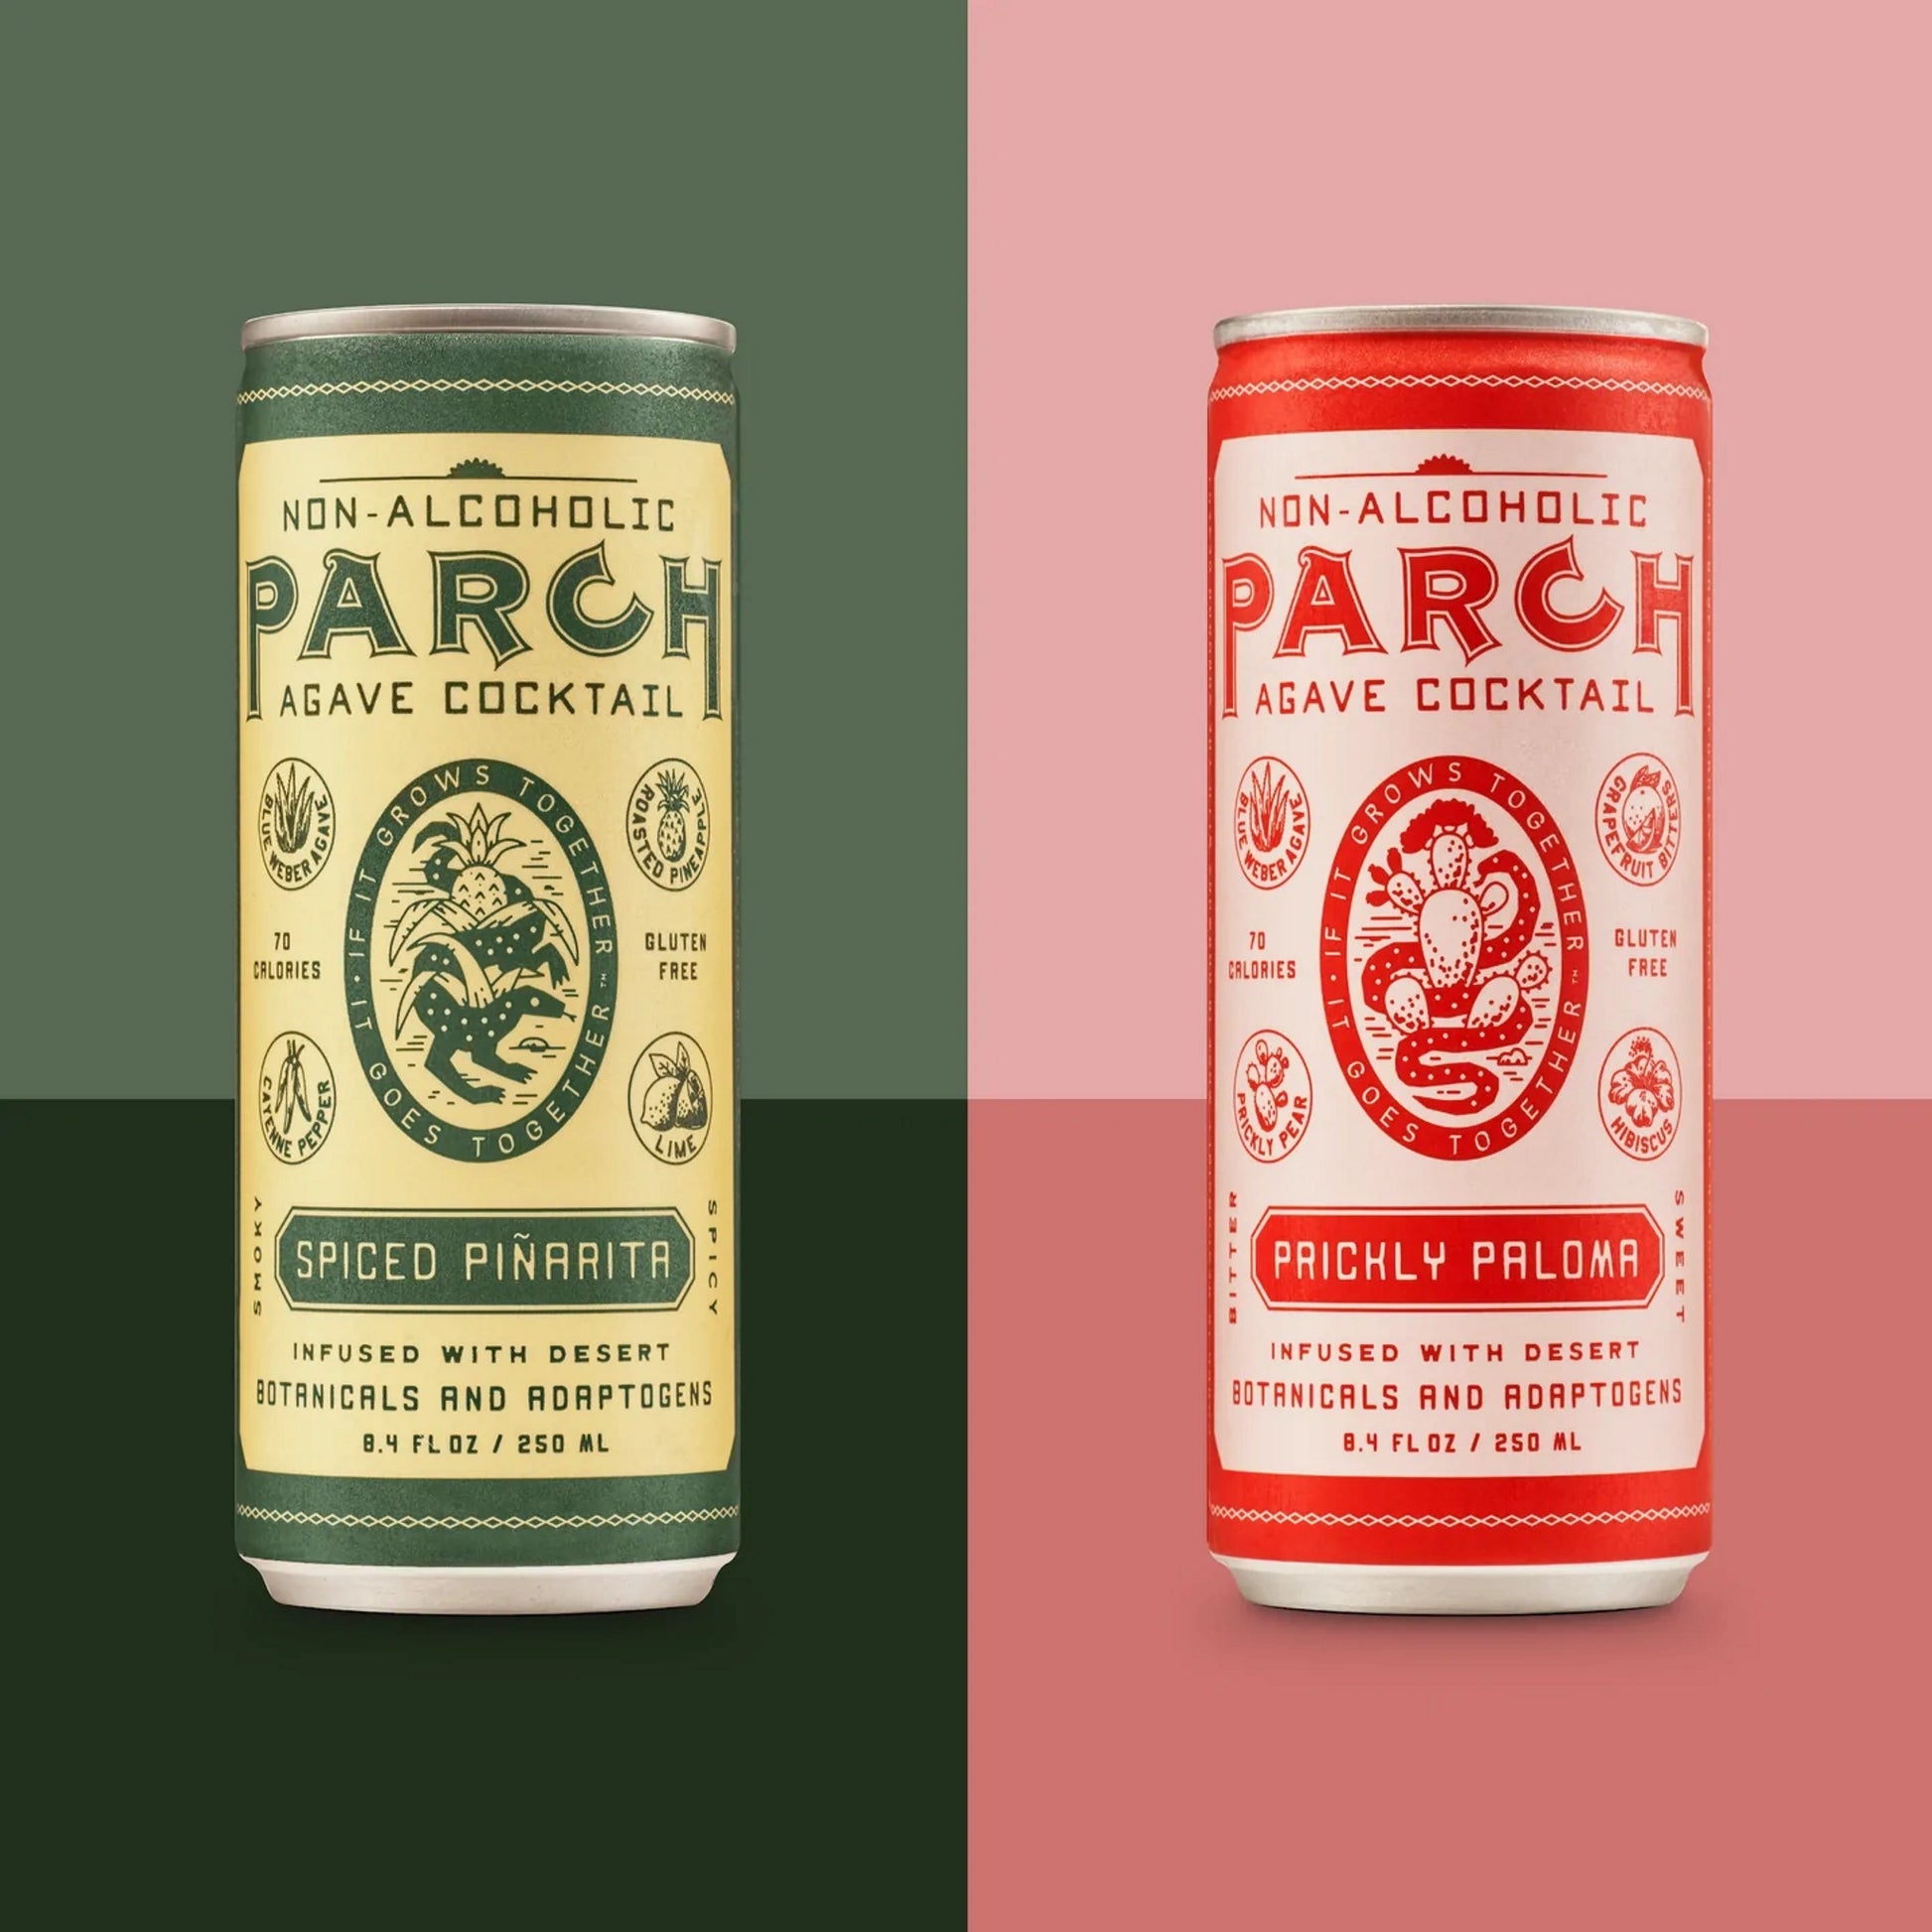 Spiced Pinarita and prickly paloma Canada - non-alcoholic agave cocktails